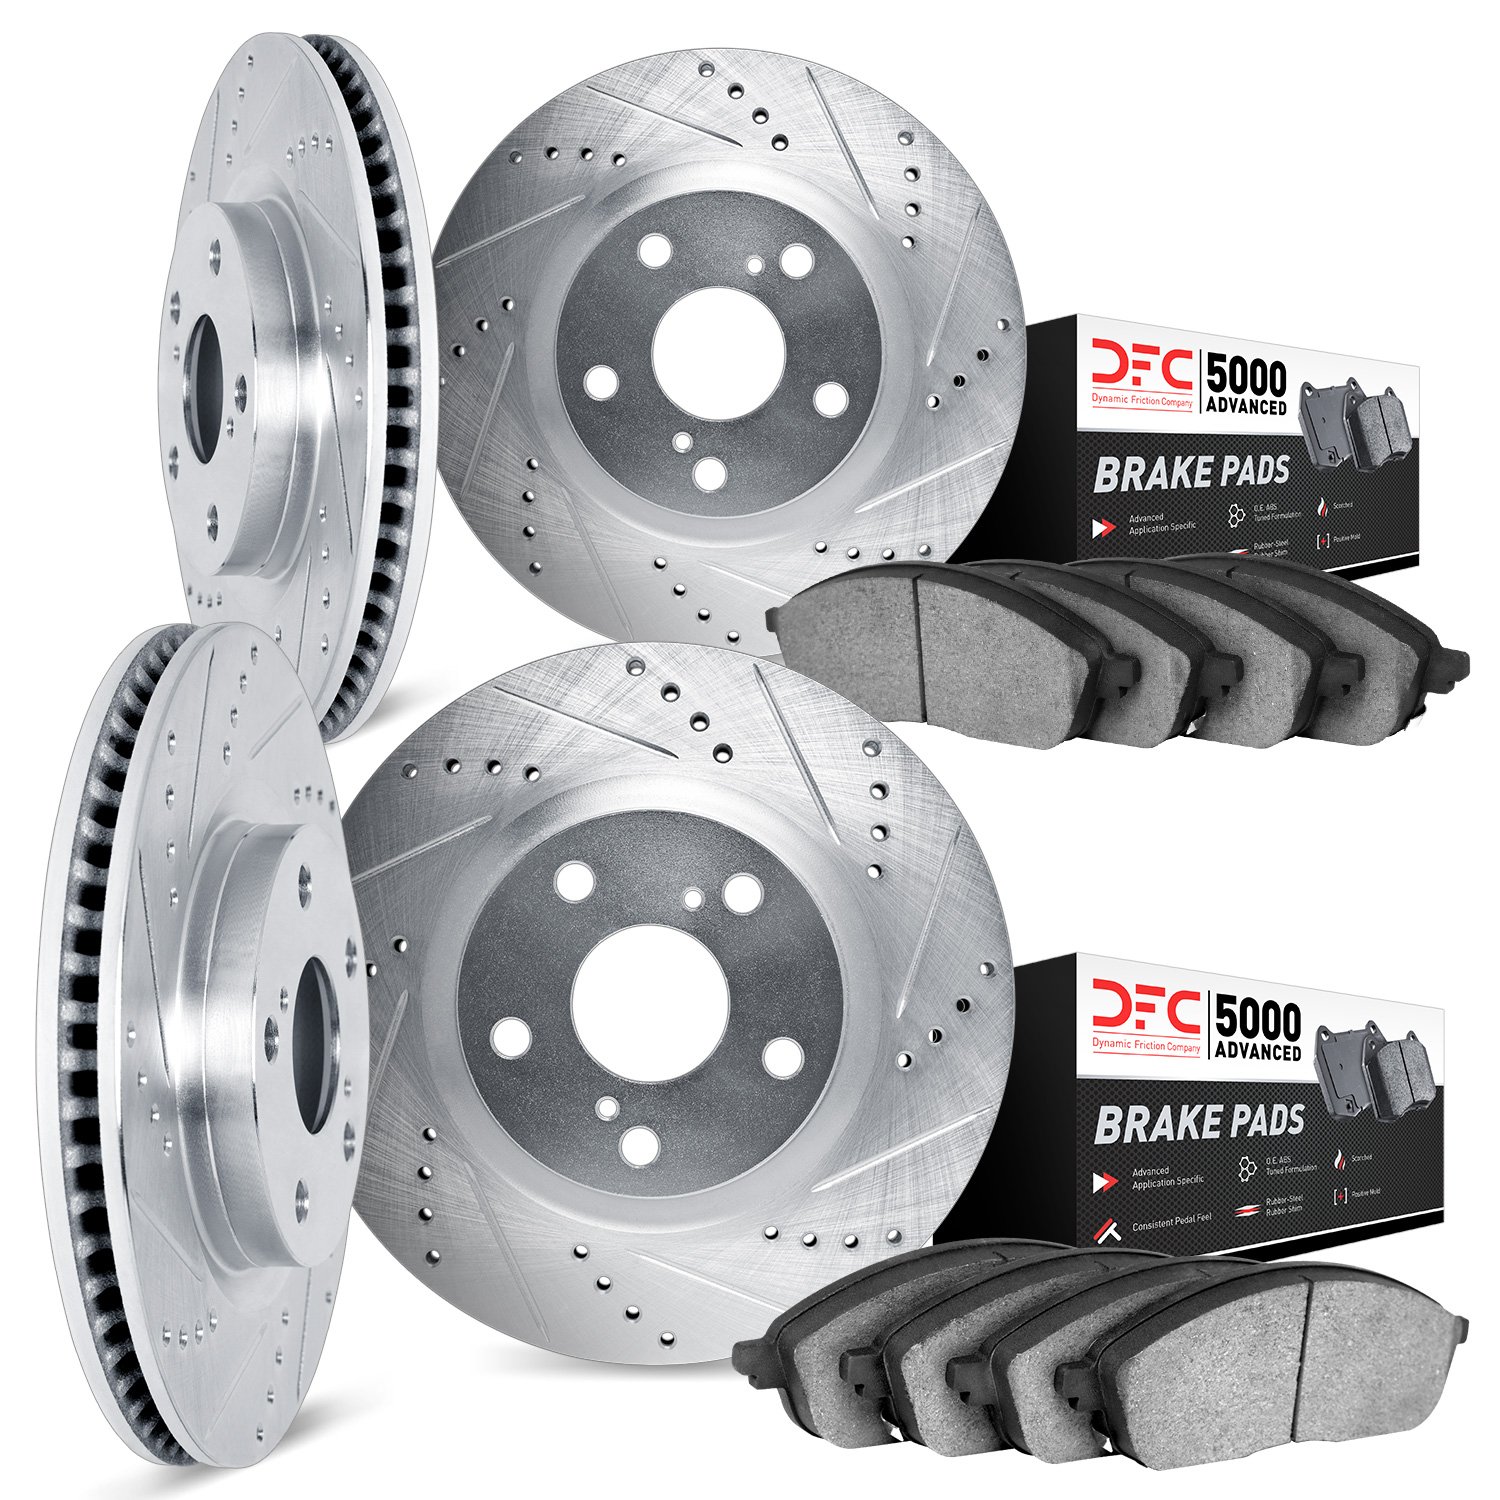 7504-80041 Drilled/Slotted Brake Rotors w/5000 Advanced Brake Pads Kit [Silver], 2004-2011 Ford/Lincoln/Mercury/Mazda, Position: